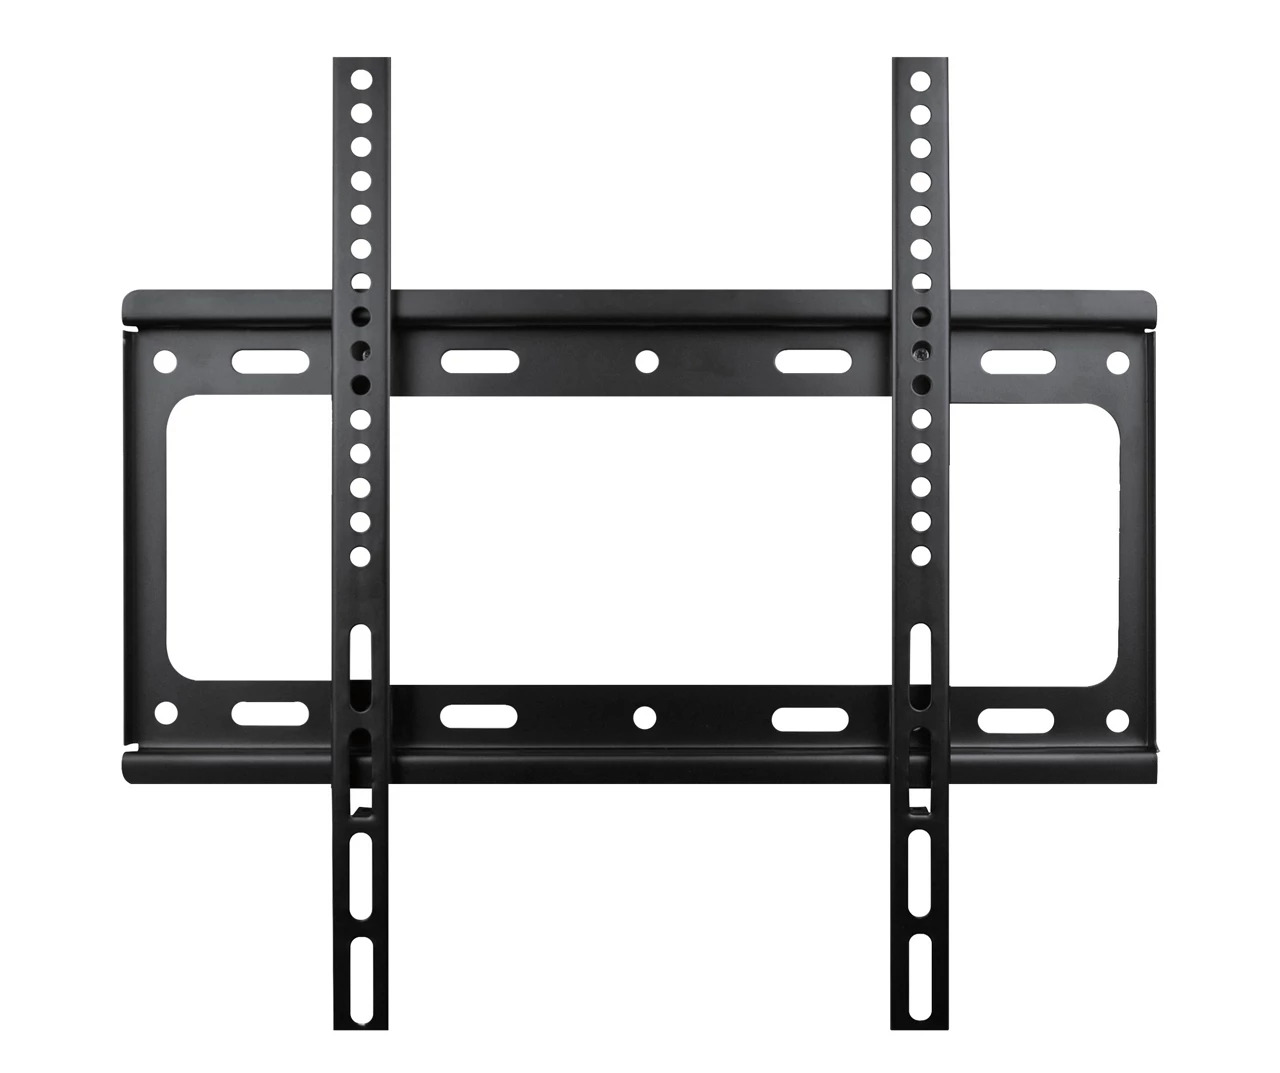 Fixed Low Profile Universal TV Wall Mount Bracket for 26"-65" Flat Screen TVs